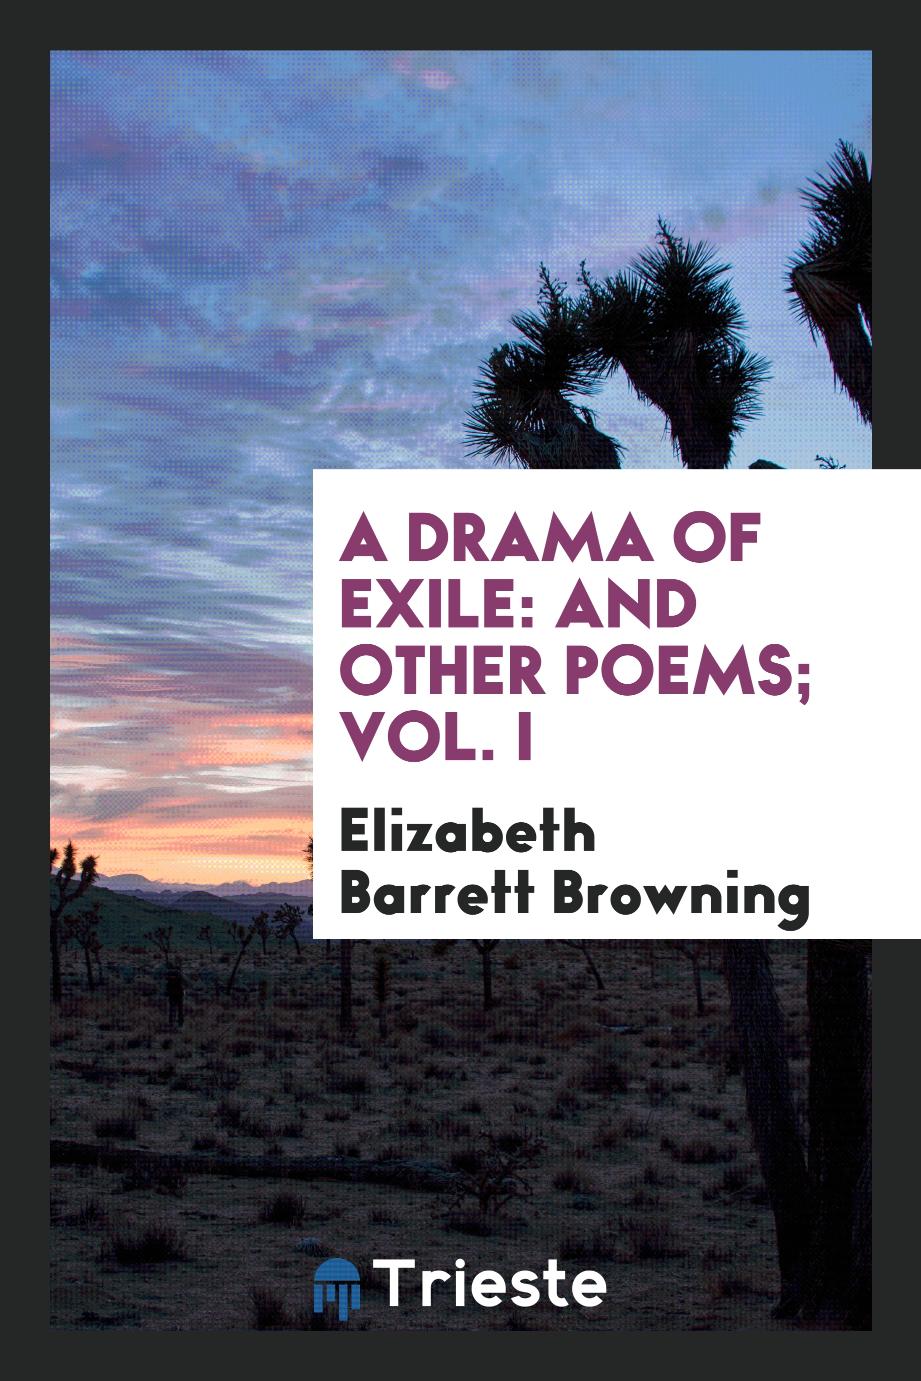 A drama of exile: and other poems; Vol. I